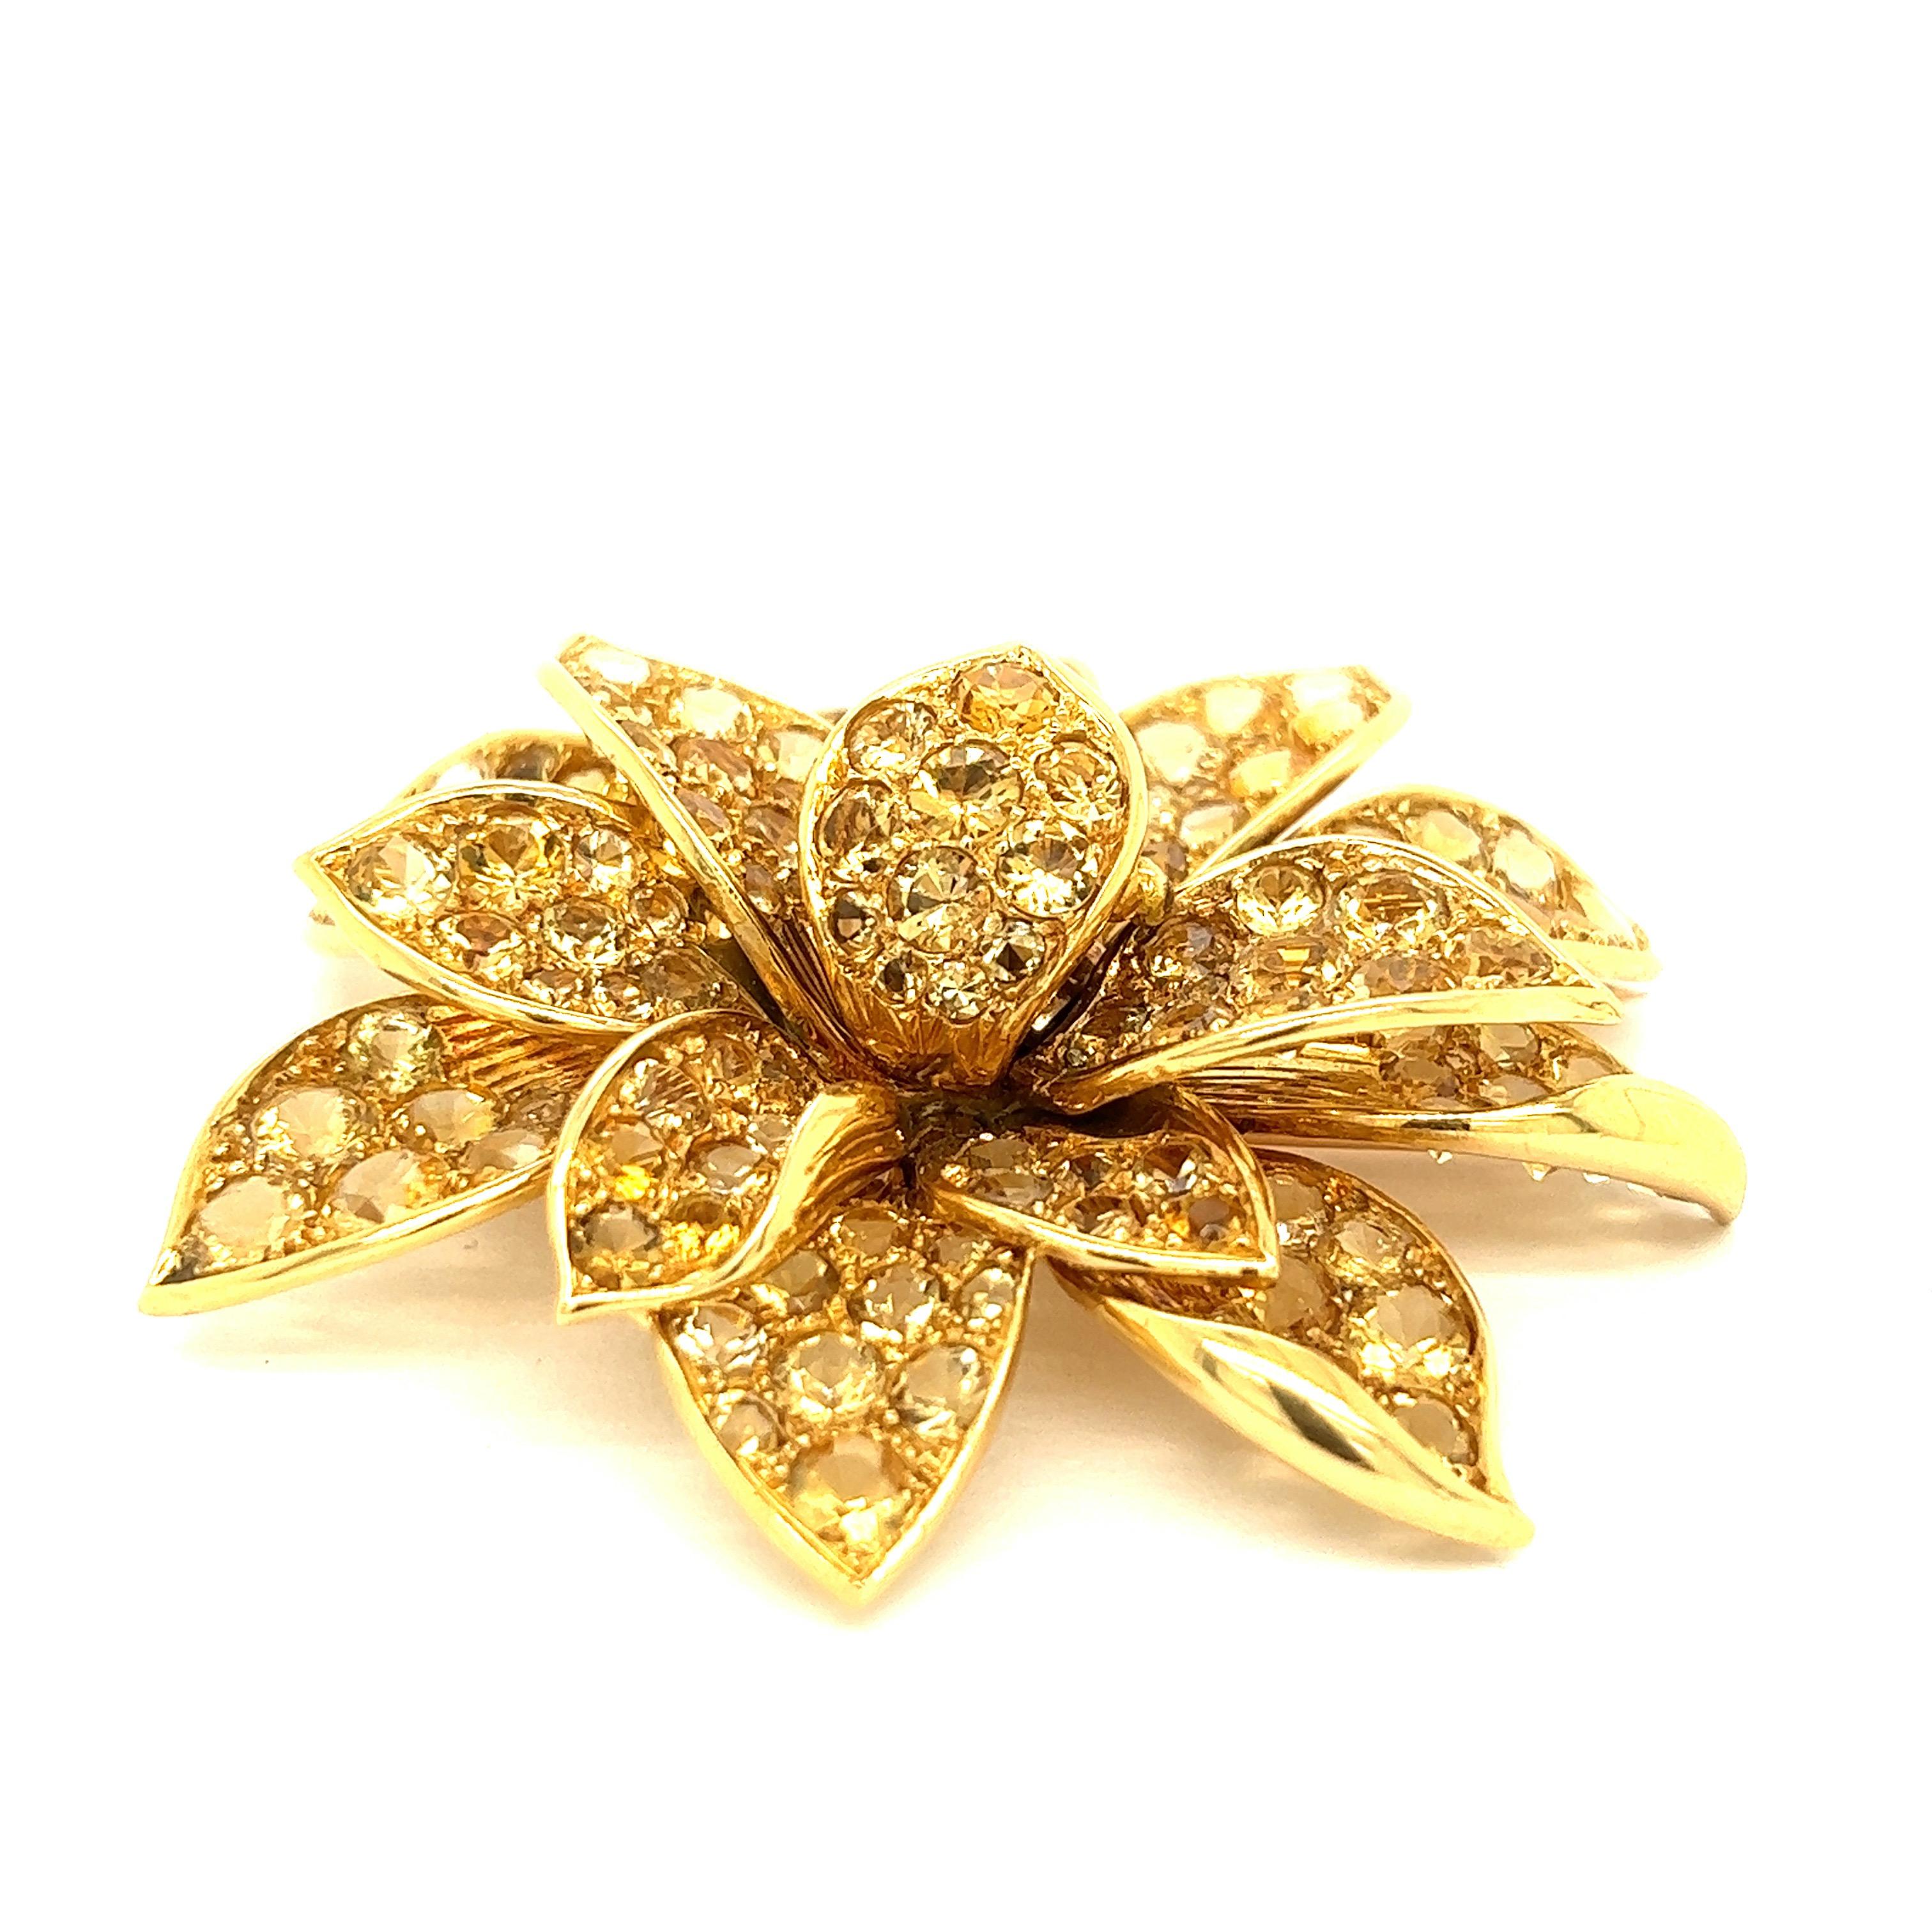 Voirin Sonrel for René Boivin Heliodor Yellow Gold Brooch In Excellent Condition For Sale In New York, NY